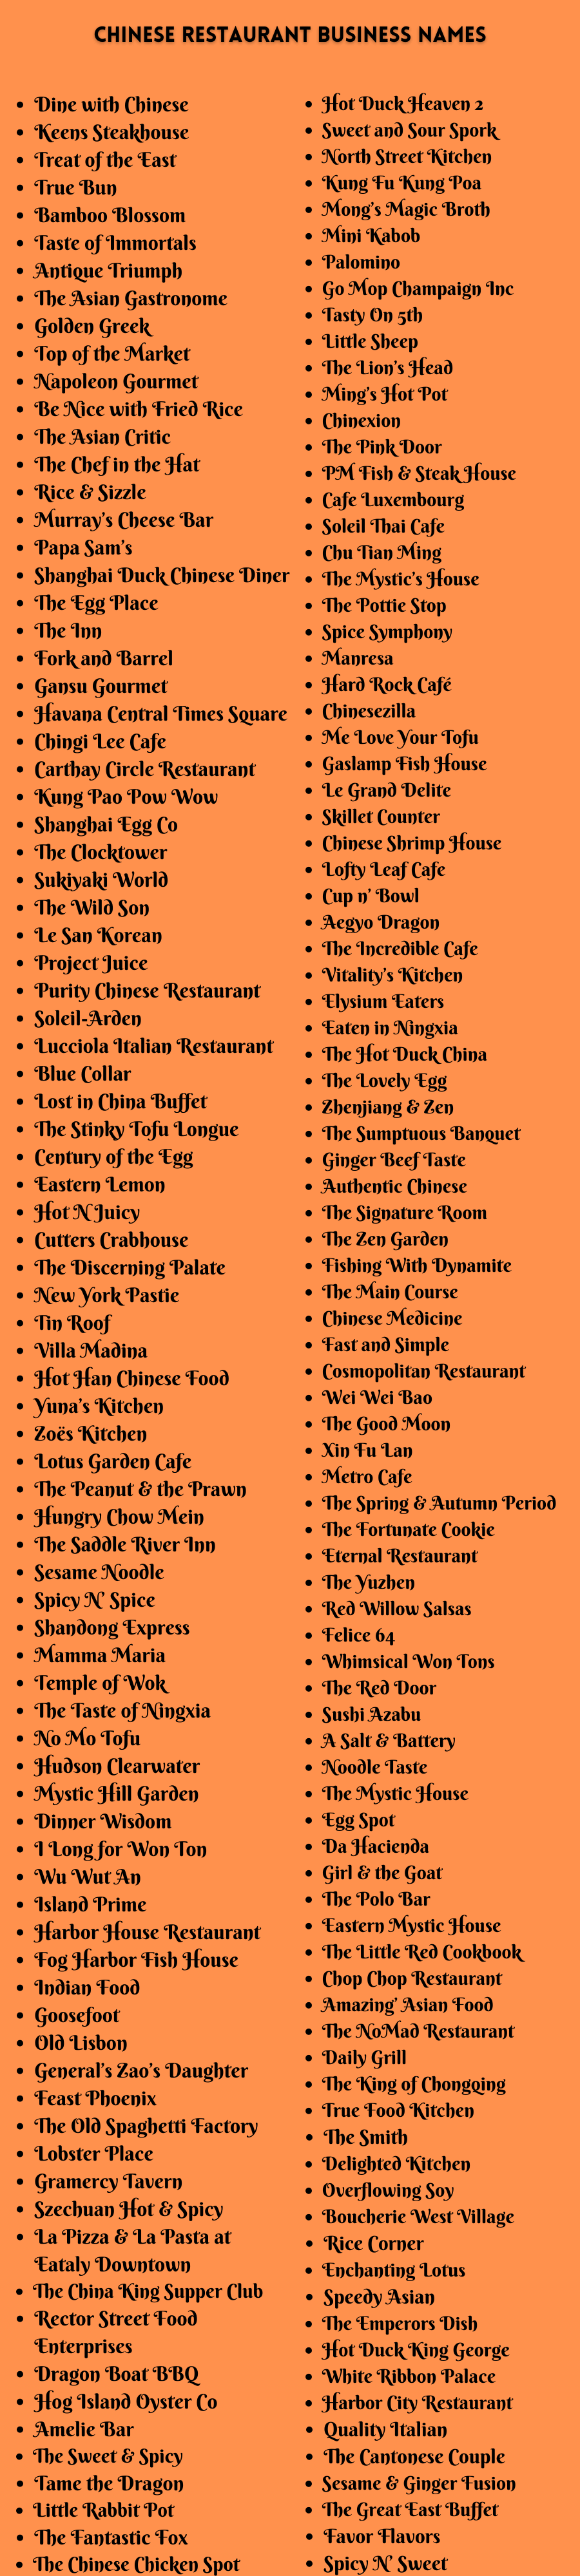 Chinese Restaurant Business Names